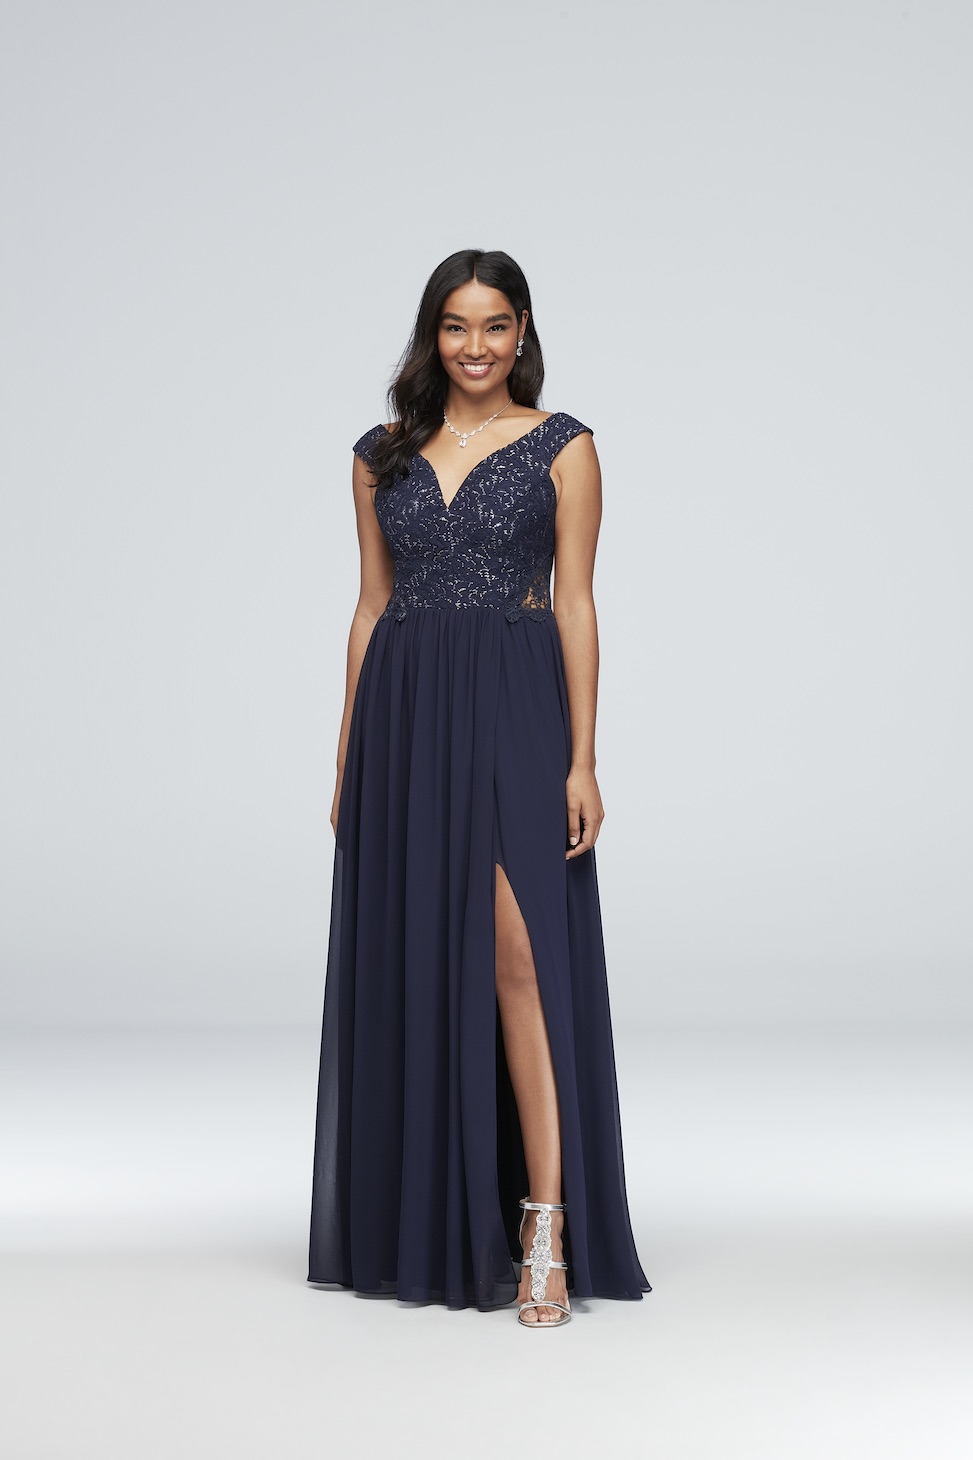 product image of an off-the-shoulder navy blue sequin evening gown from david's bridal with cutouts and lace details plus a side slit